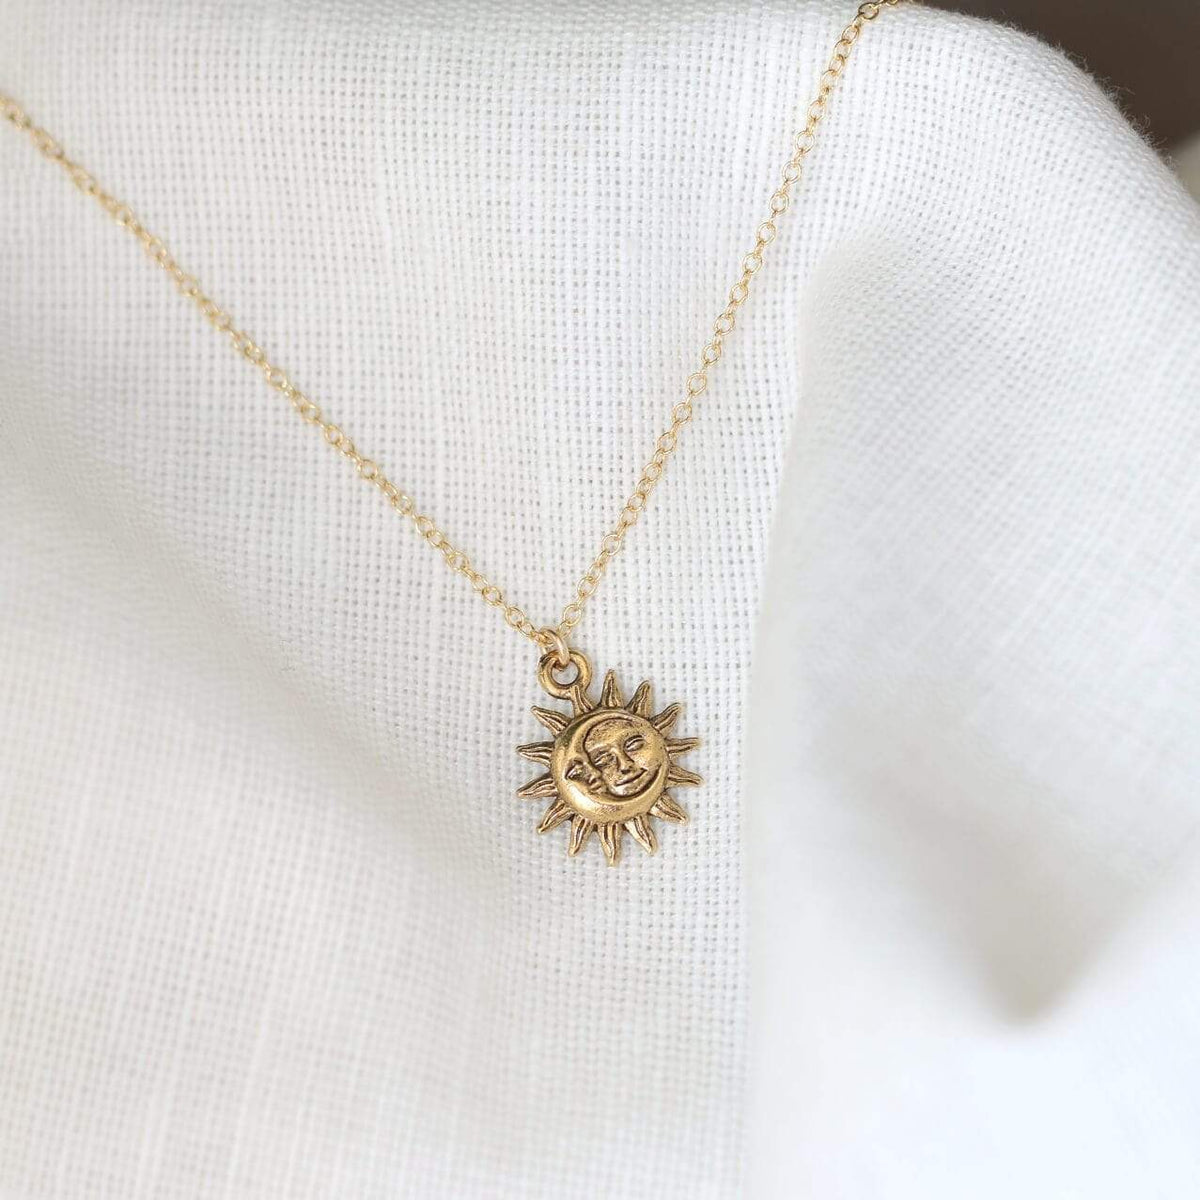 Detail view of 14K Gold Filled Light After Dark Necklace with Gold Sun Moon Charm on white background.